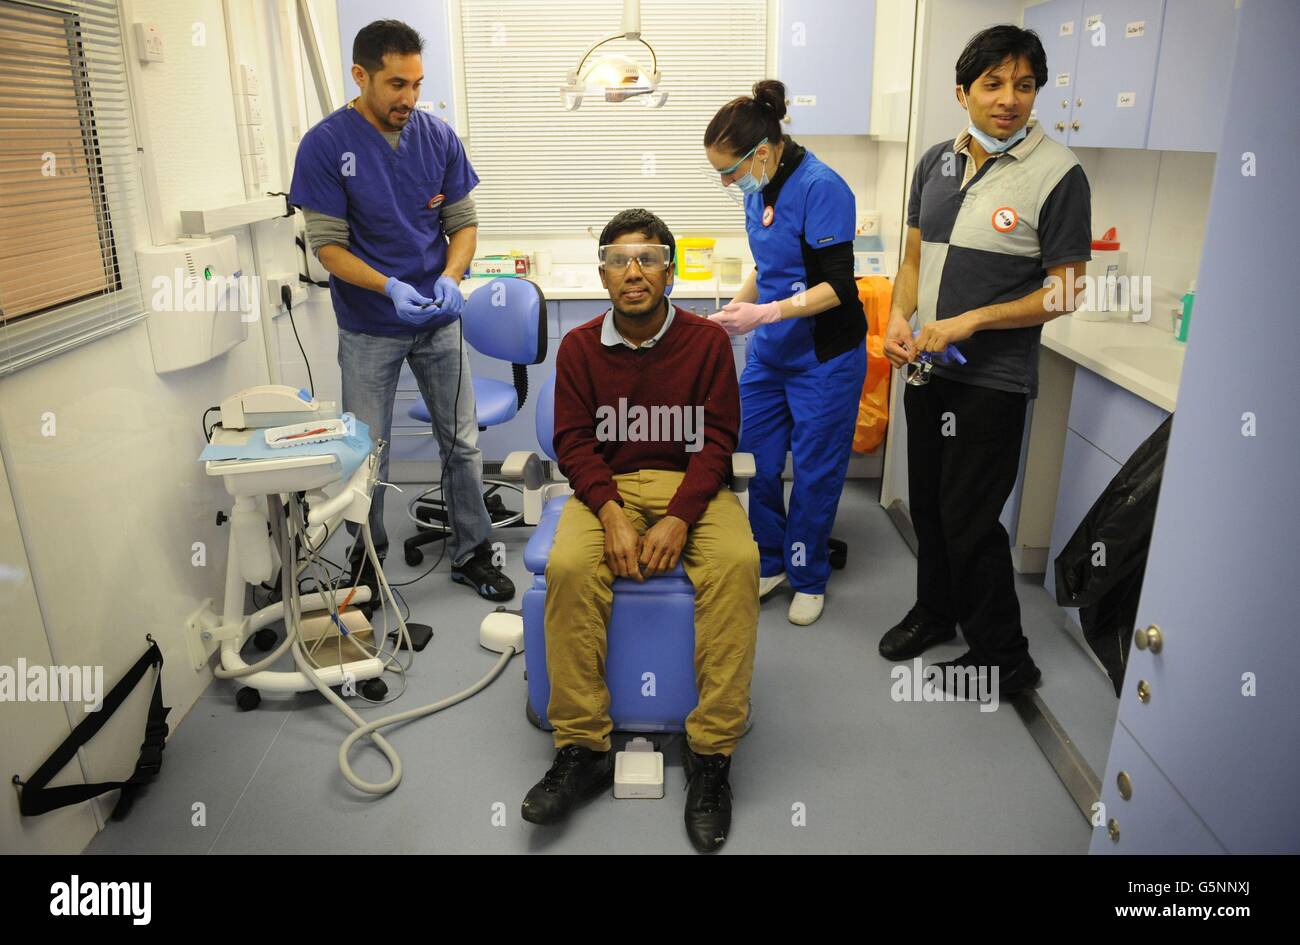 A client named Raj has his teeth checked by a dentist in a mobile surgery at this year's Crisis at Christmas shelter in London's docklands which along with eight other shelters in the capital is expecting over 3,000 guests during the Christmas period. Stock Photo